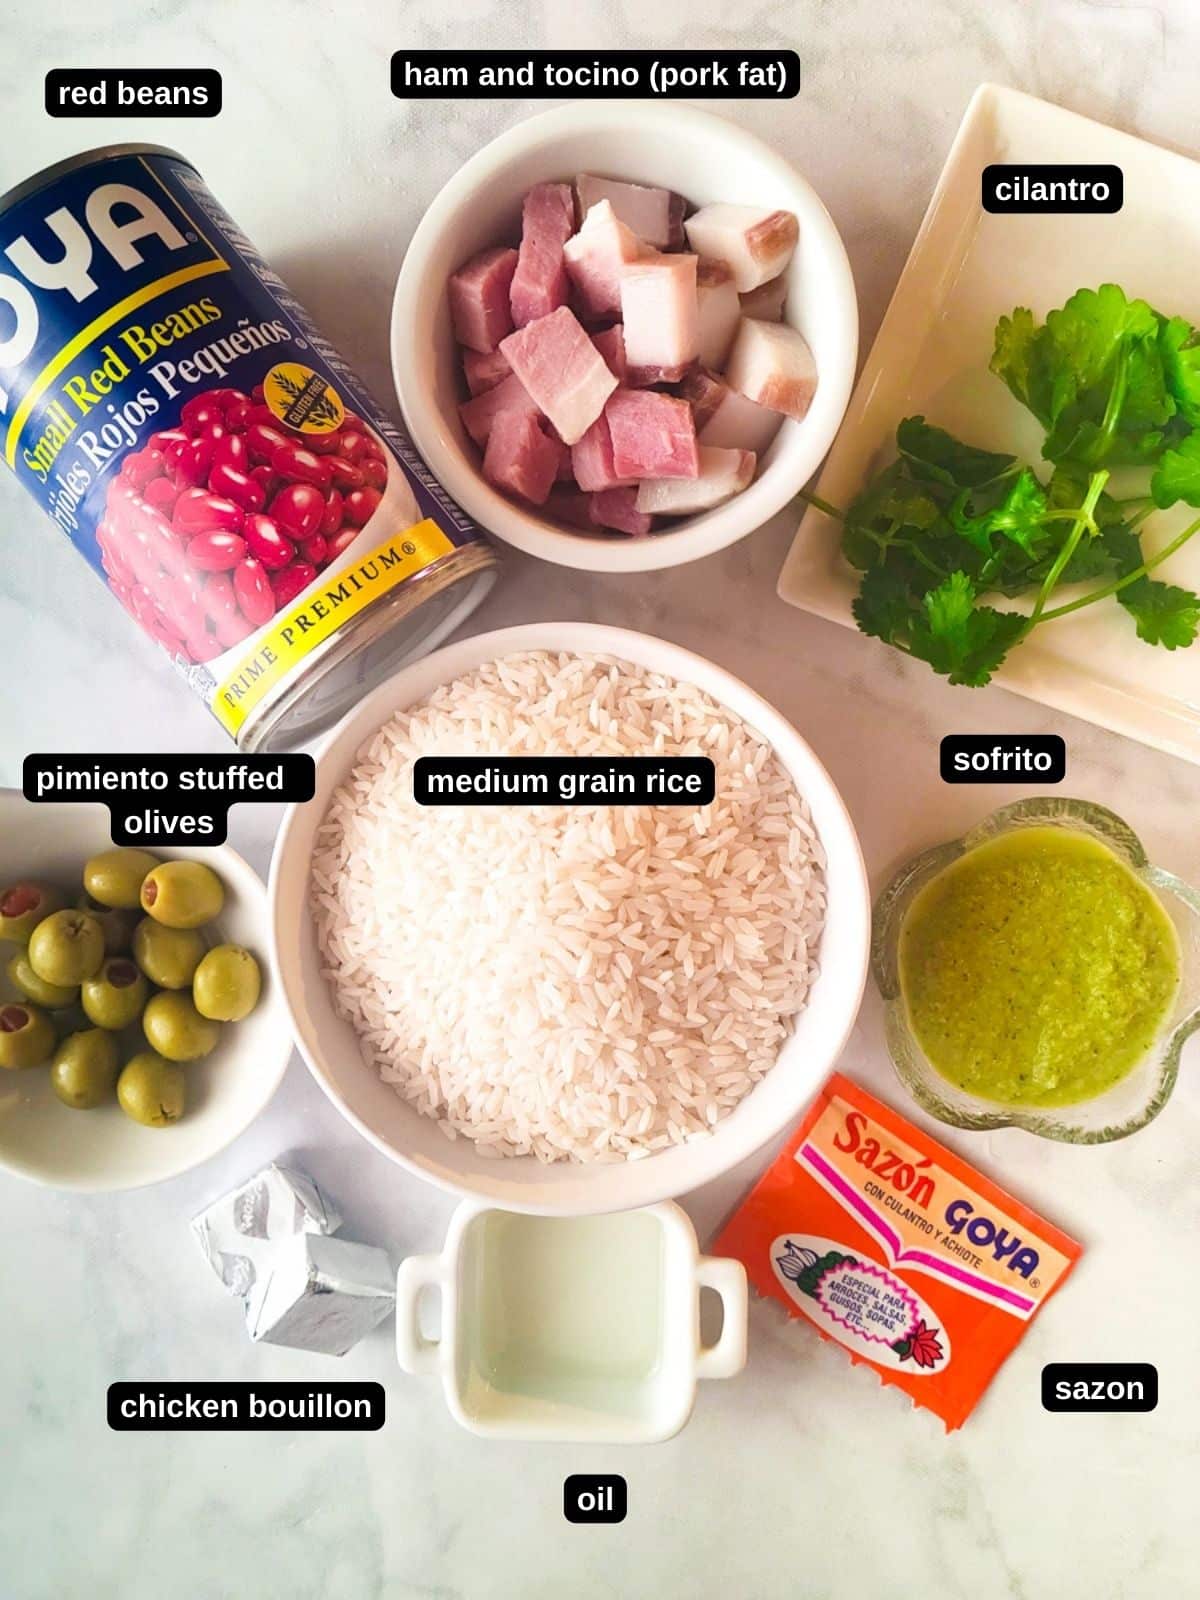 List of ingredients for Arroz con Habichuelas (Puerto Rican Rice and Beans).